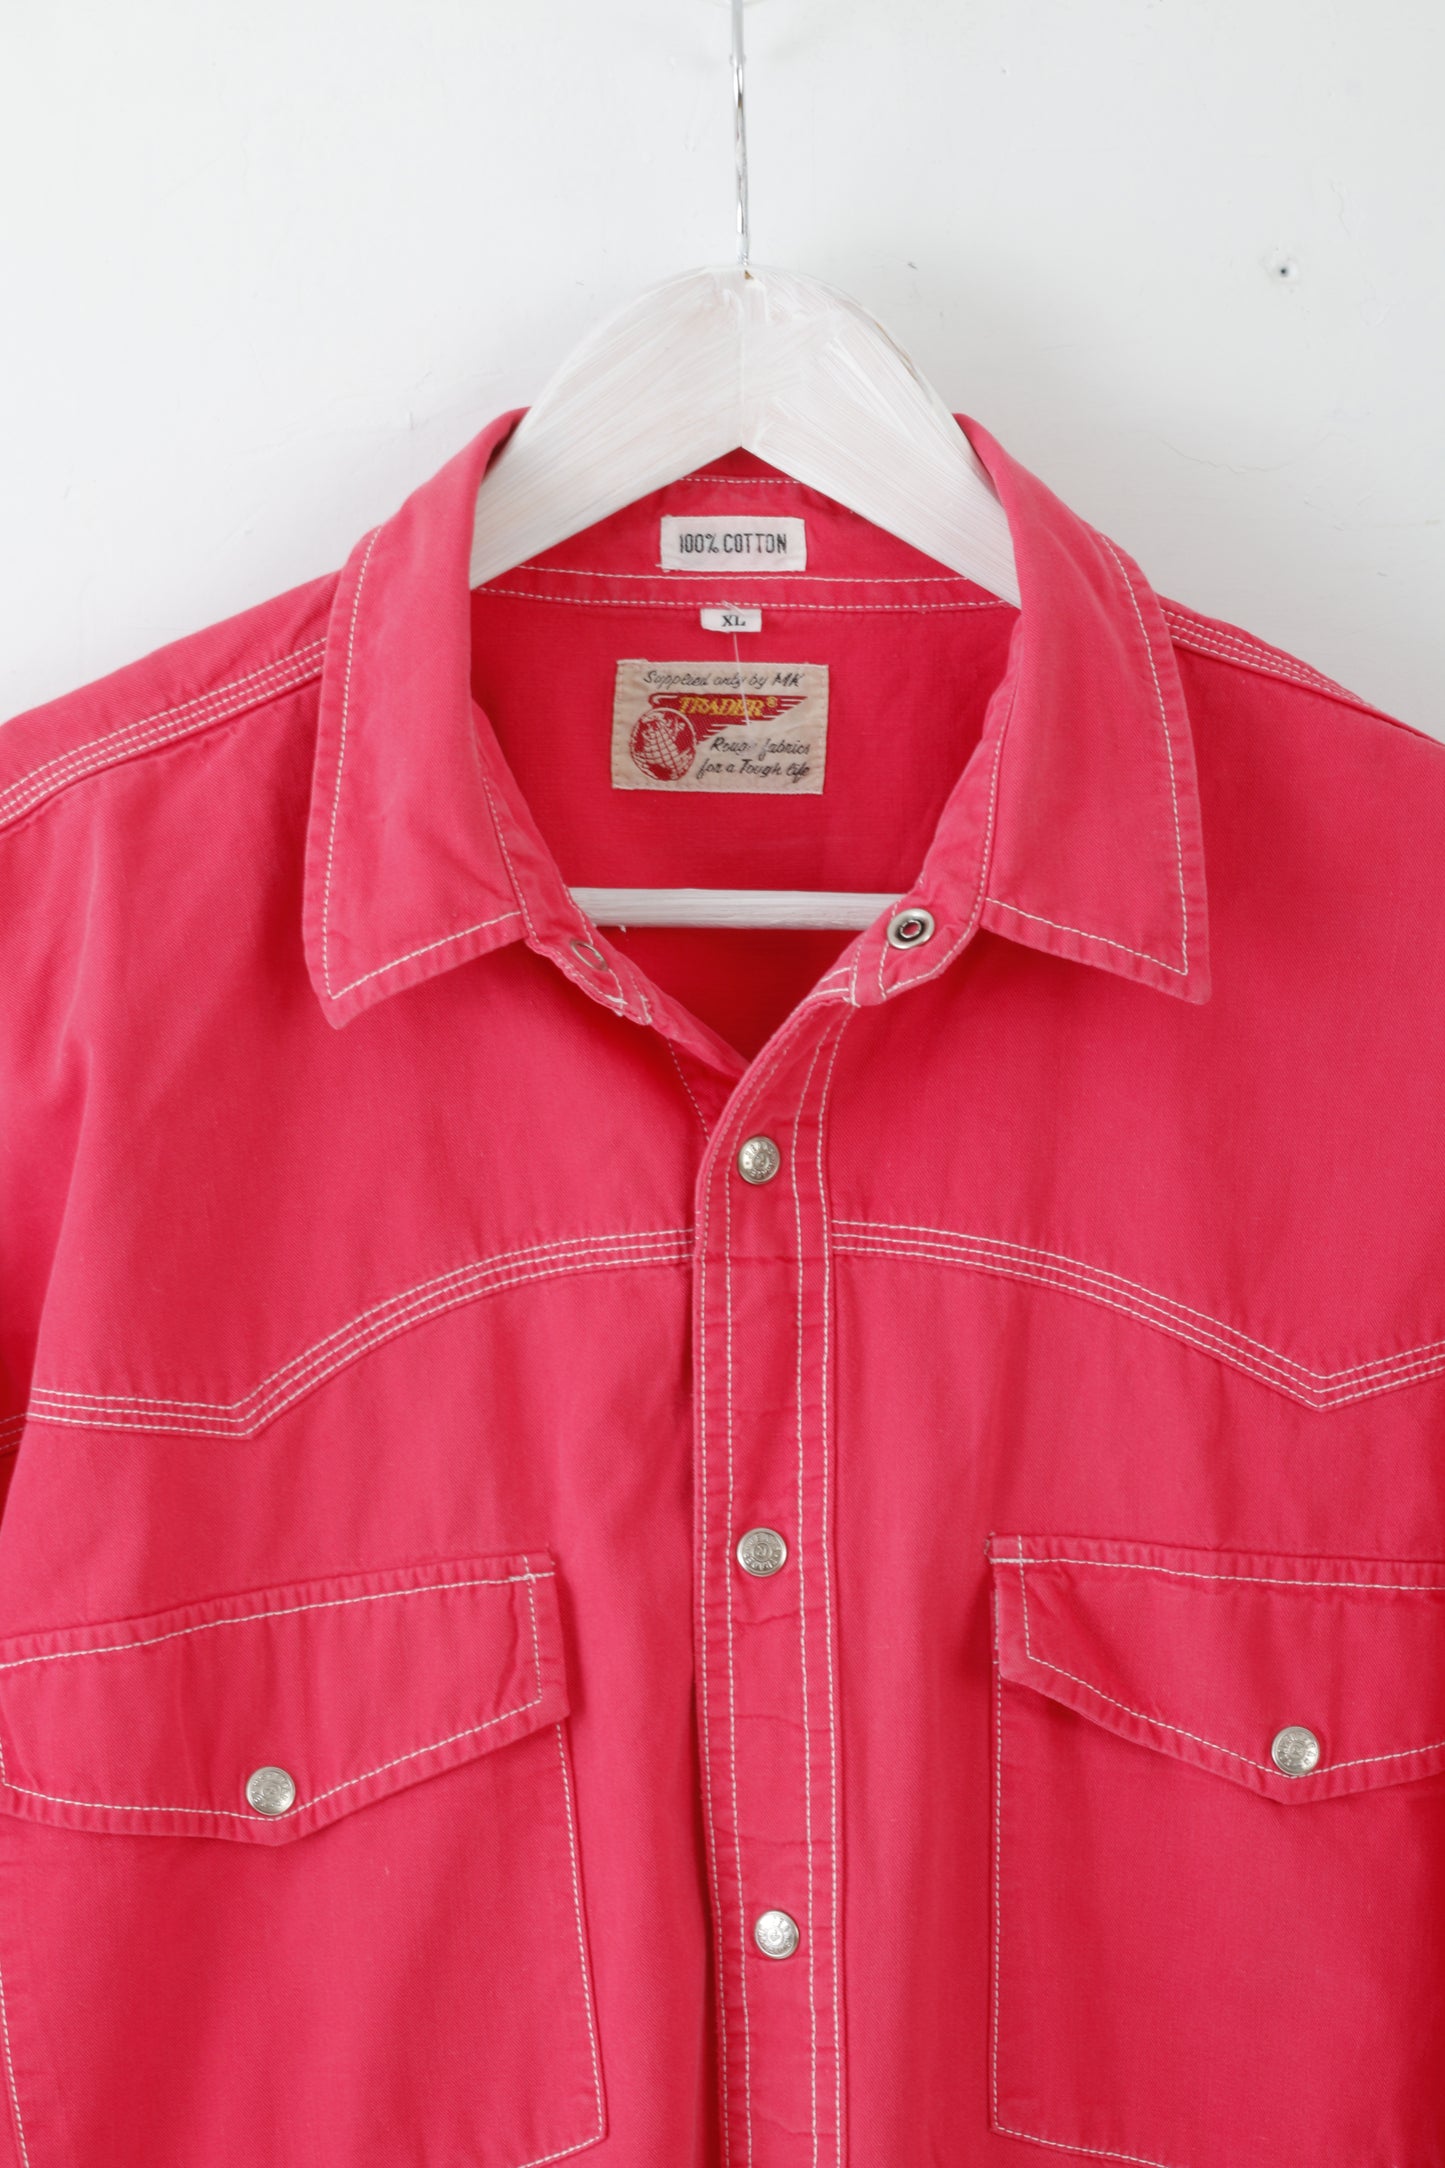 Trader Mens XL Casual Shirt Pink Long Sleeve Cotton Buttoned Breast Pockets